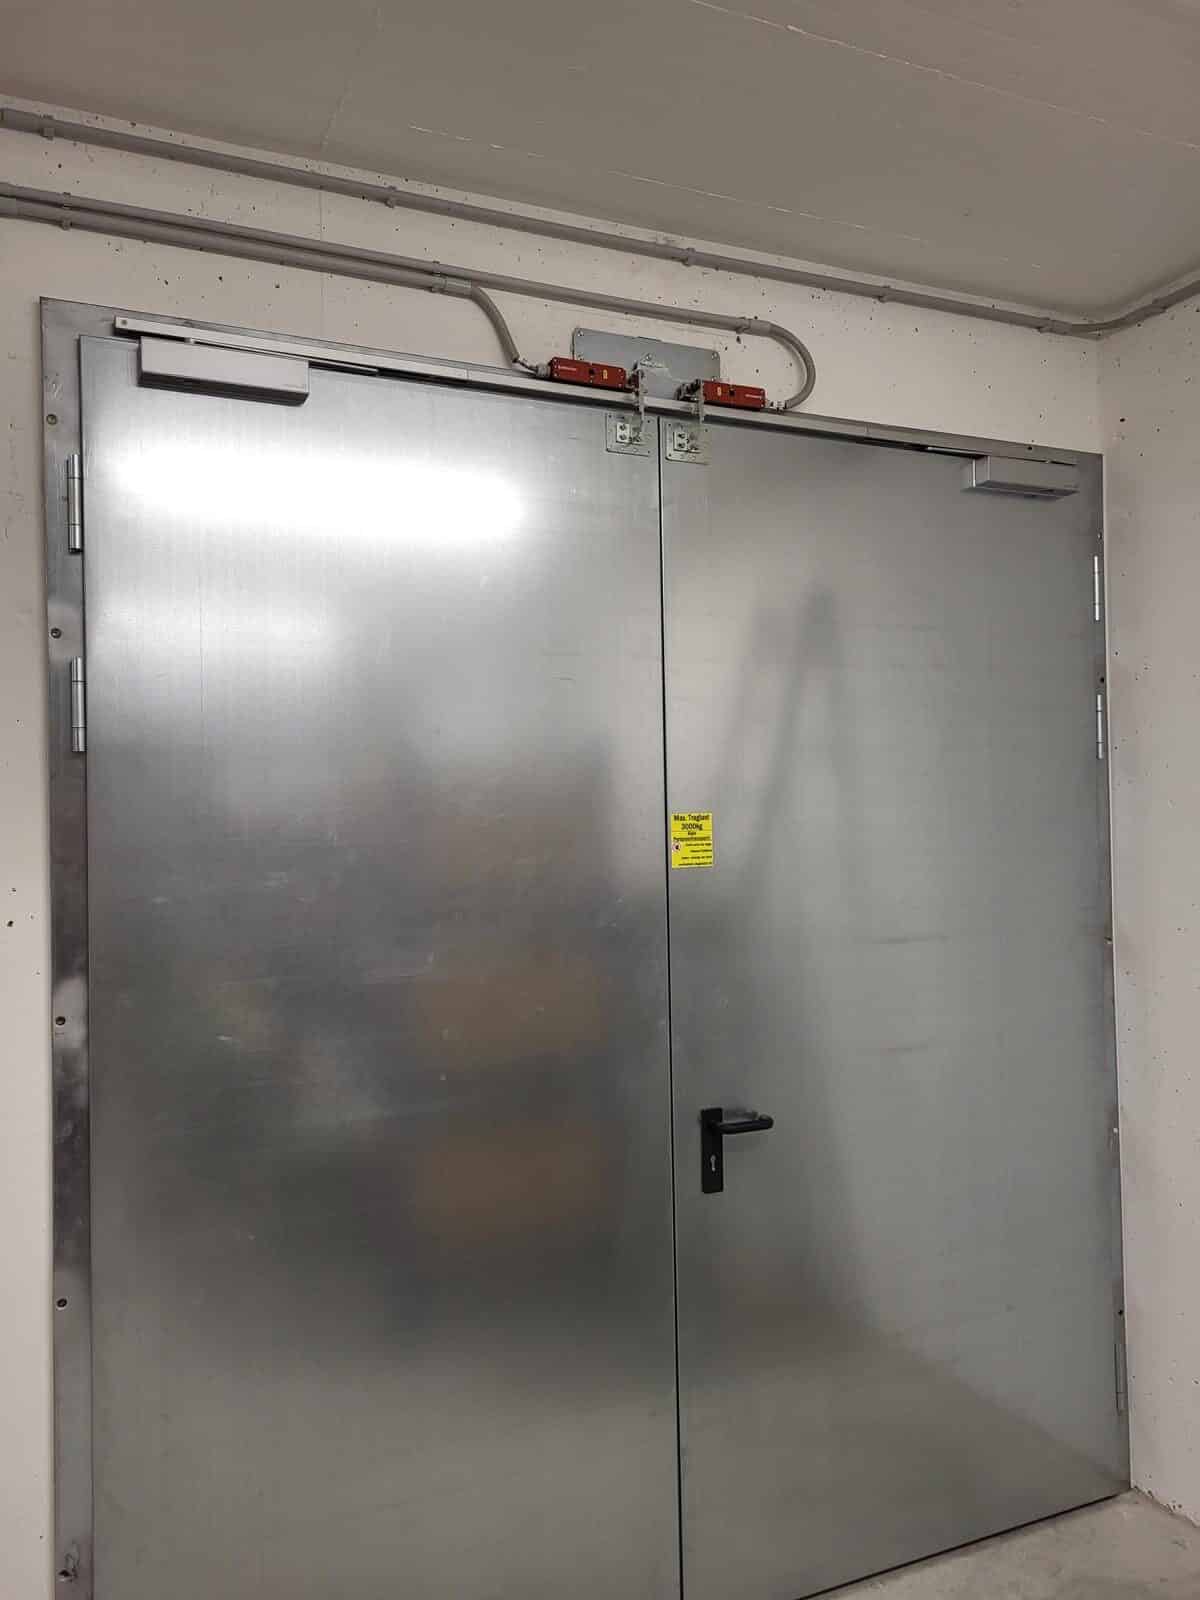 A metal door in a garage with a heavy duty lift table attached to it.